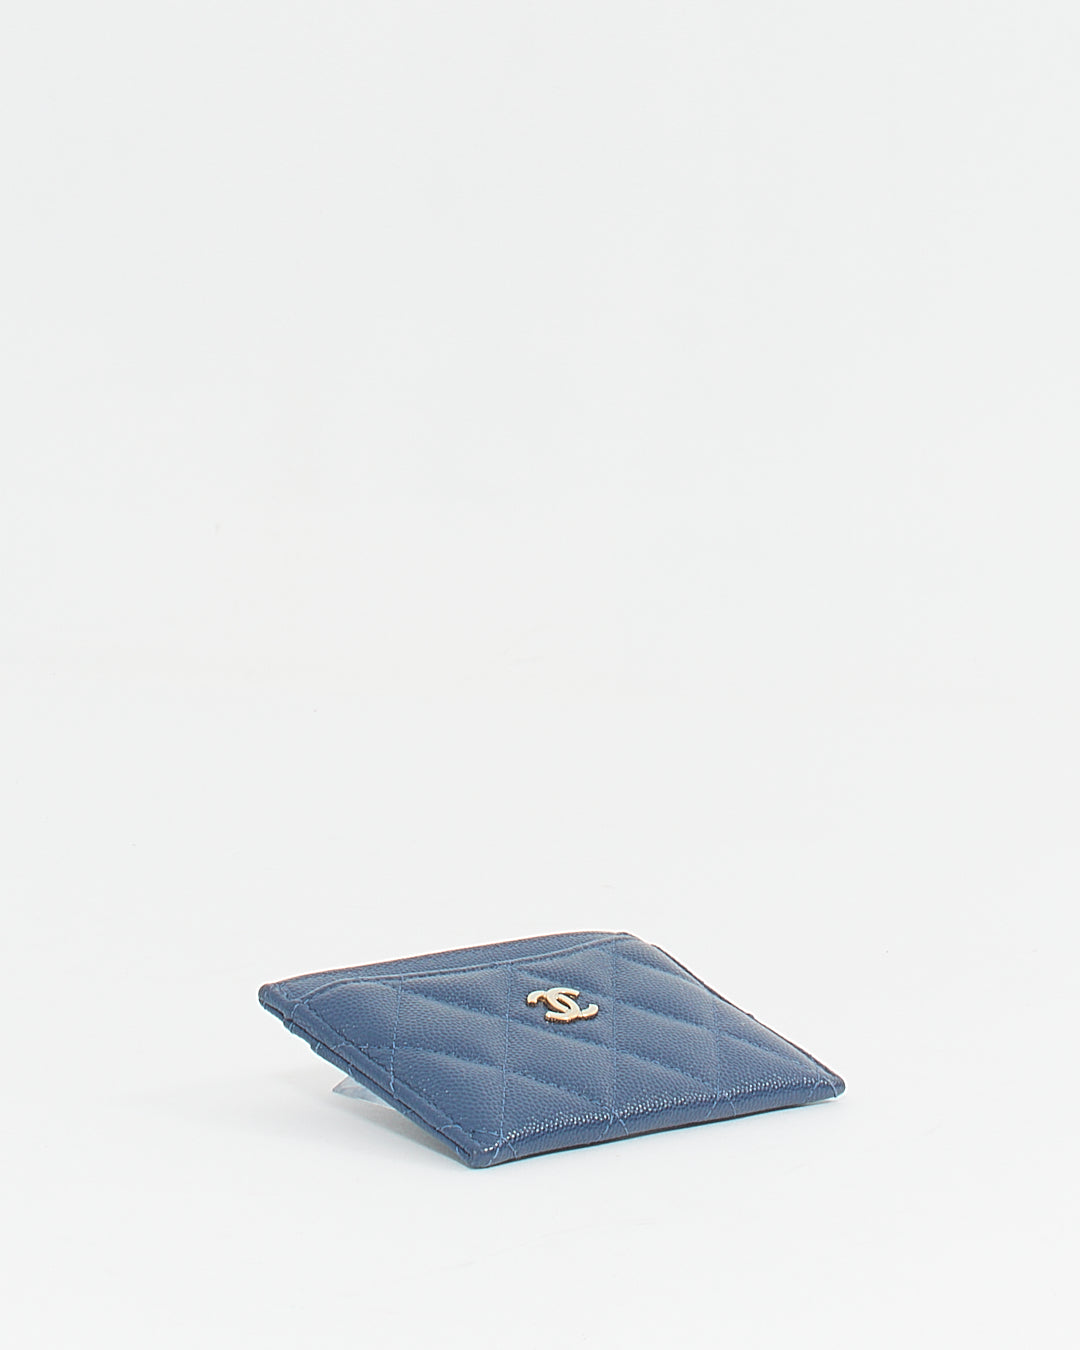 Chanel Navy Blue Caviar Leather Card Holder